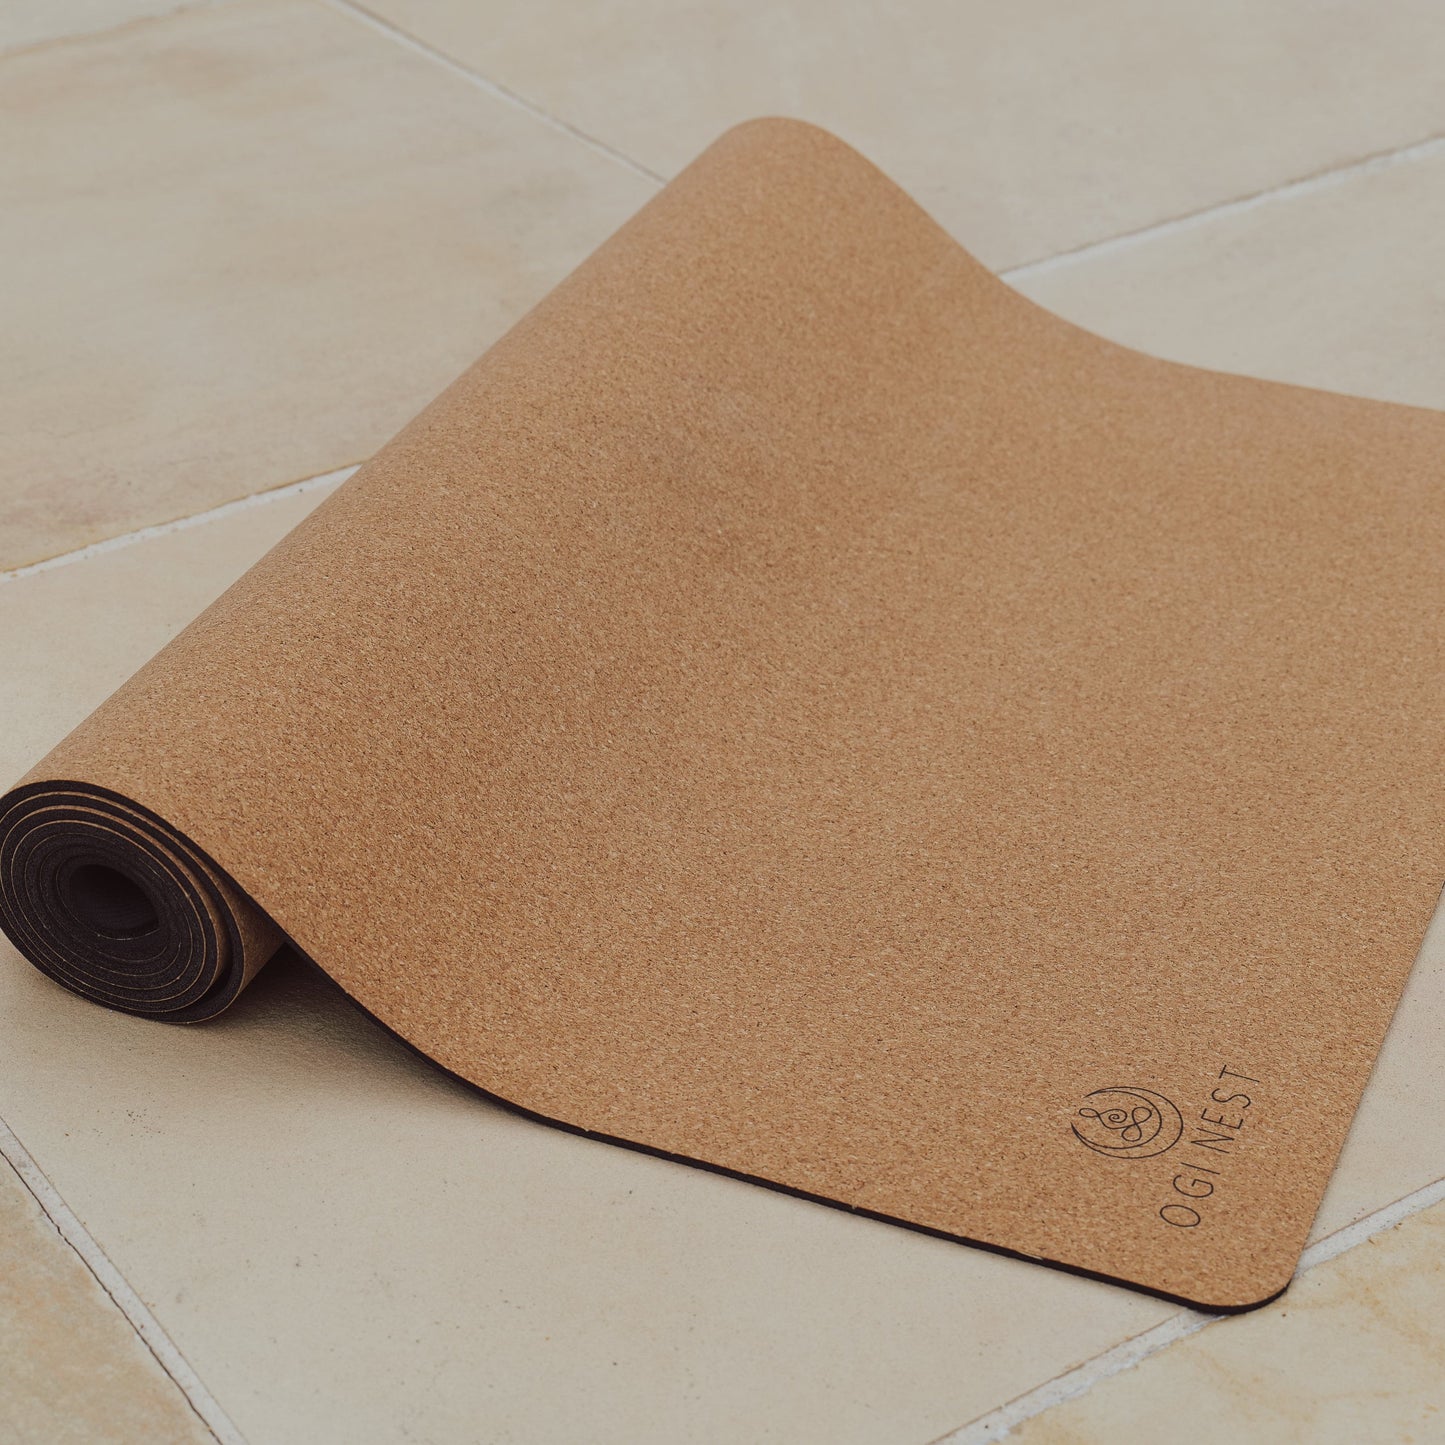 Hamsa hand cork and natural rubber yoga mat partially rolled up.